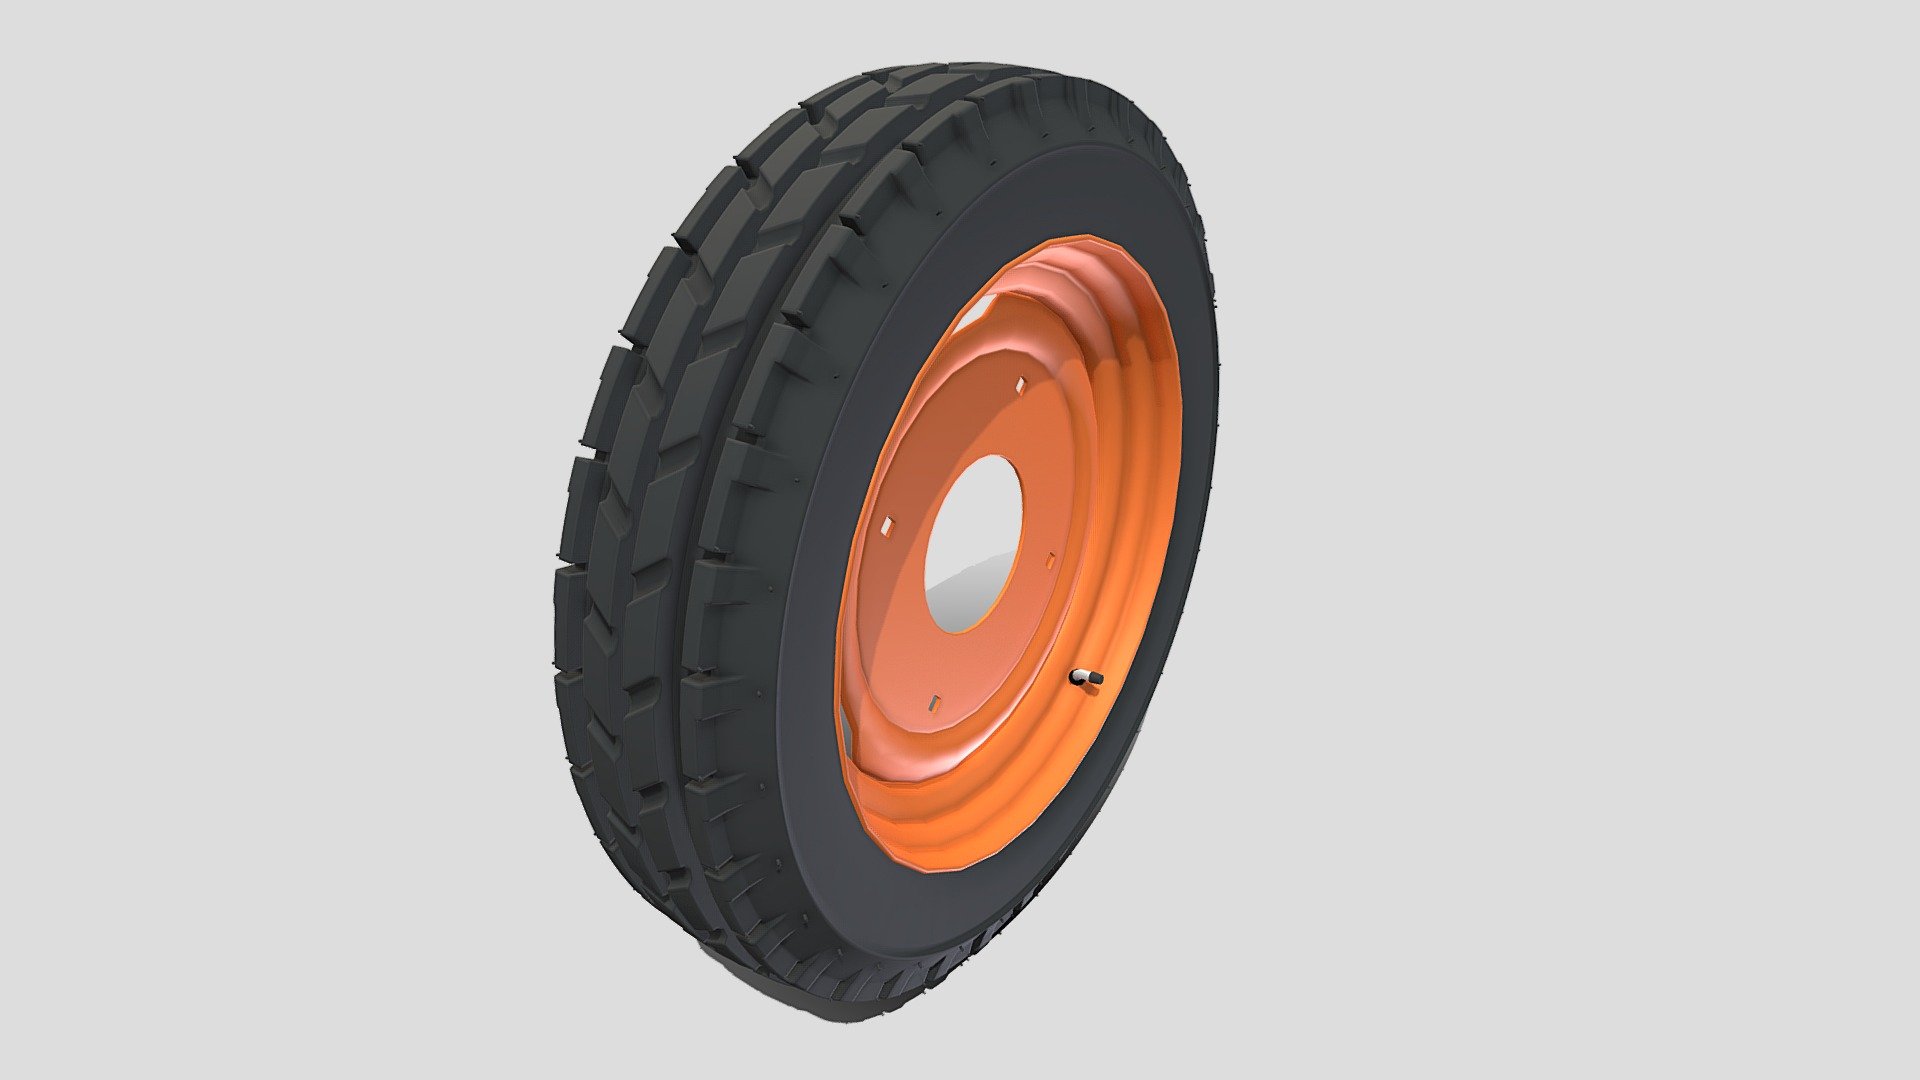 Tractor Wheel 3d model rendered with Cycles in Blender, as per seen on attached images. 
The 3d model is scaled to original size in Blender.

File formats:
-.blend, rendered with cycles, as seen in the images;
-.obj, with materials applied;
-.dae, with materials applied;
-.fbx, with materials applied;
-.stl;

Files come named appropriately and split by file format.

3D Software:
The 3D model was originally created in Blender 2.8 and rendered with Cycles.

Materials and textures:
The models have materials applied in all formats, and are ready to import and render.

Preview scenes:
The preview images are rendered in Blender using its built-in render engine &lsquo;Cycles'.
Note that the blend files come directly with the rendering scene included and the render command will generate the exact result as seen in previews.
Scene elements are on a different layer from the actual model for easier manipulation of objects 3d model